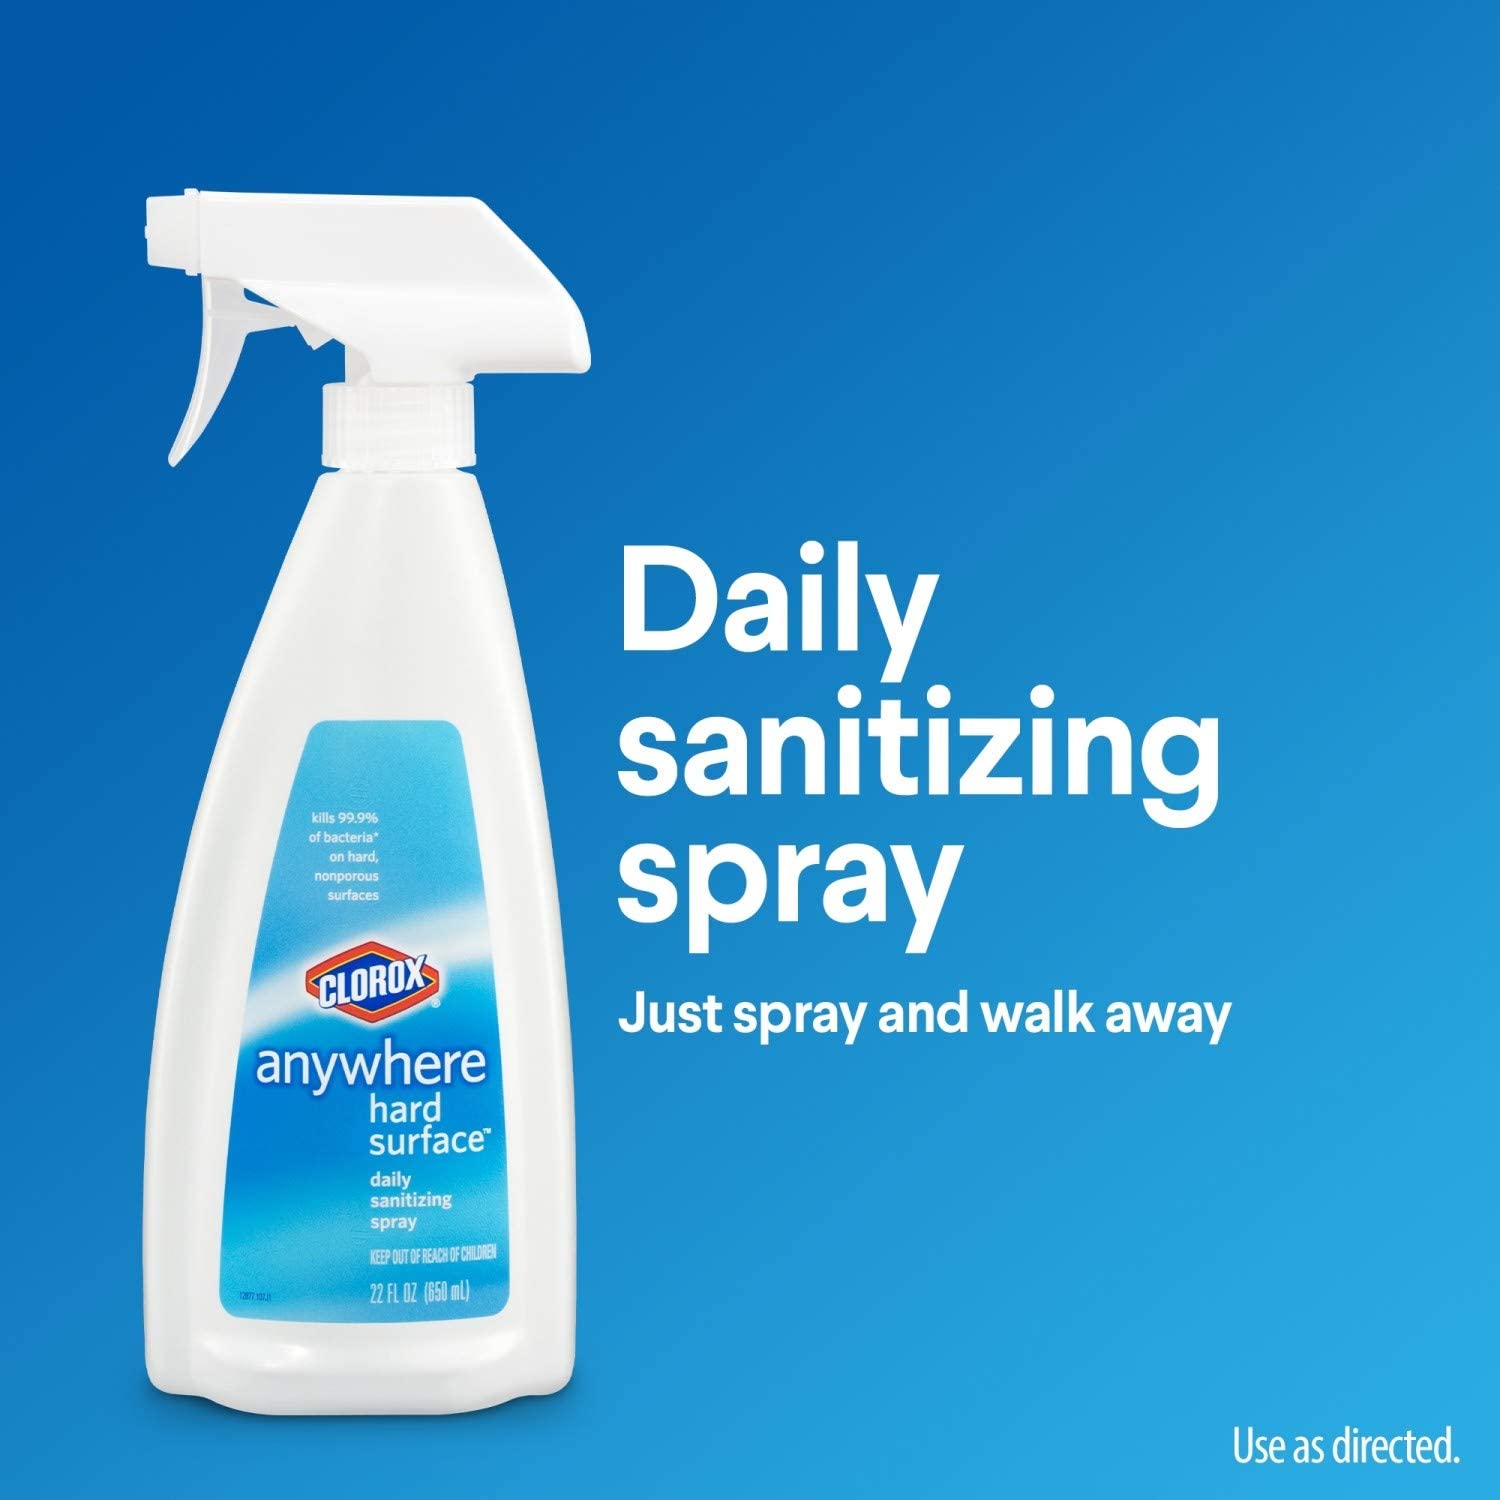 Clorox Anywhere Hard Surface Daily Sanitizing Spray 22 Ounce Spray Bottle - Pack of 9 (Package May Vary)